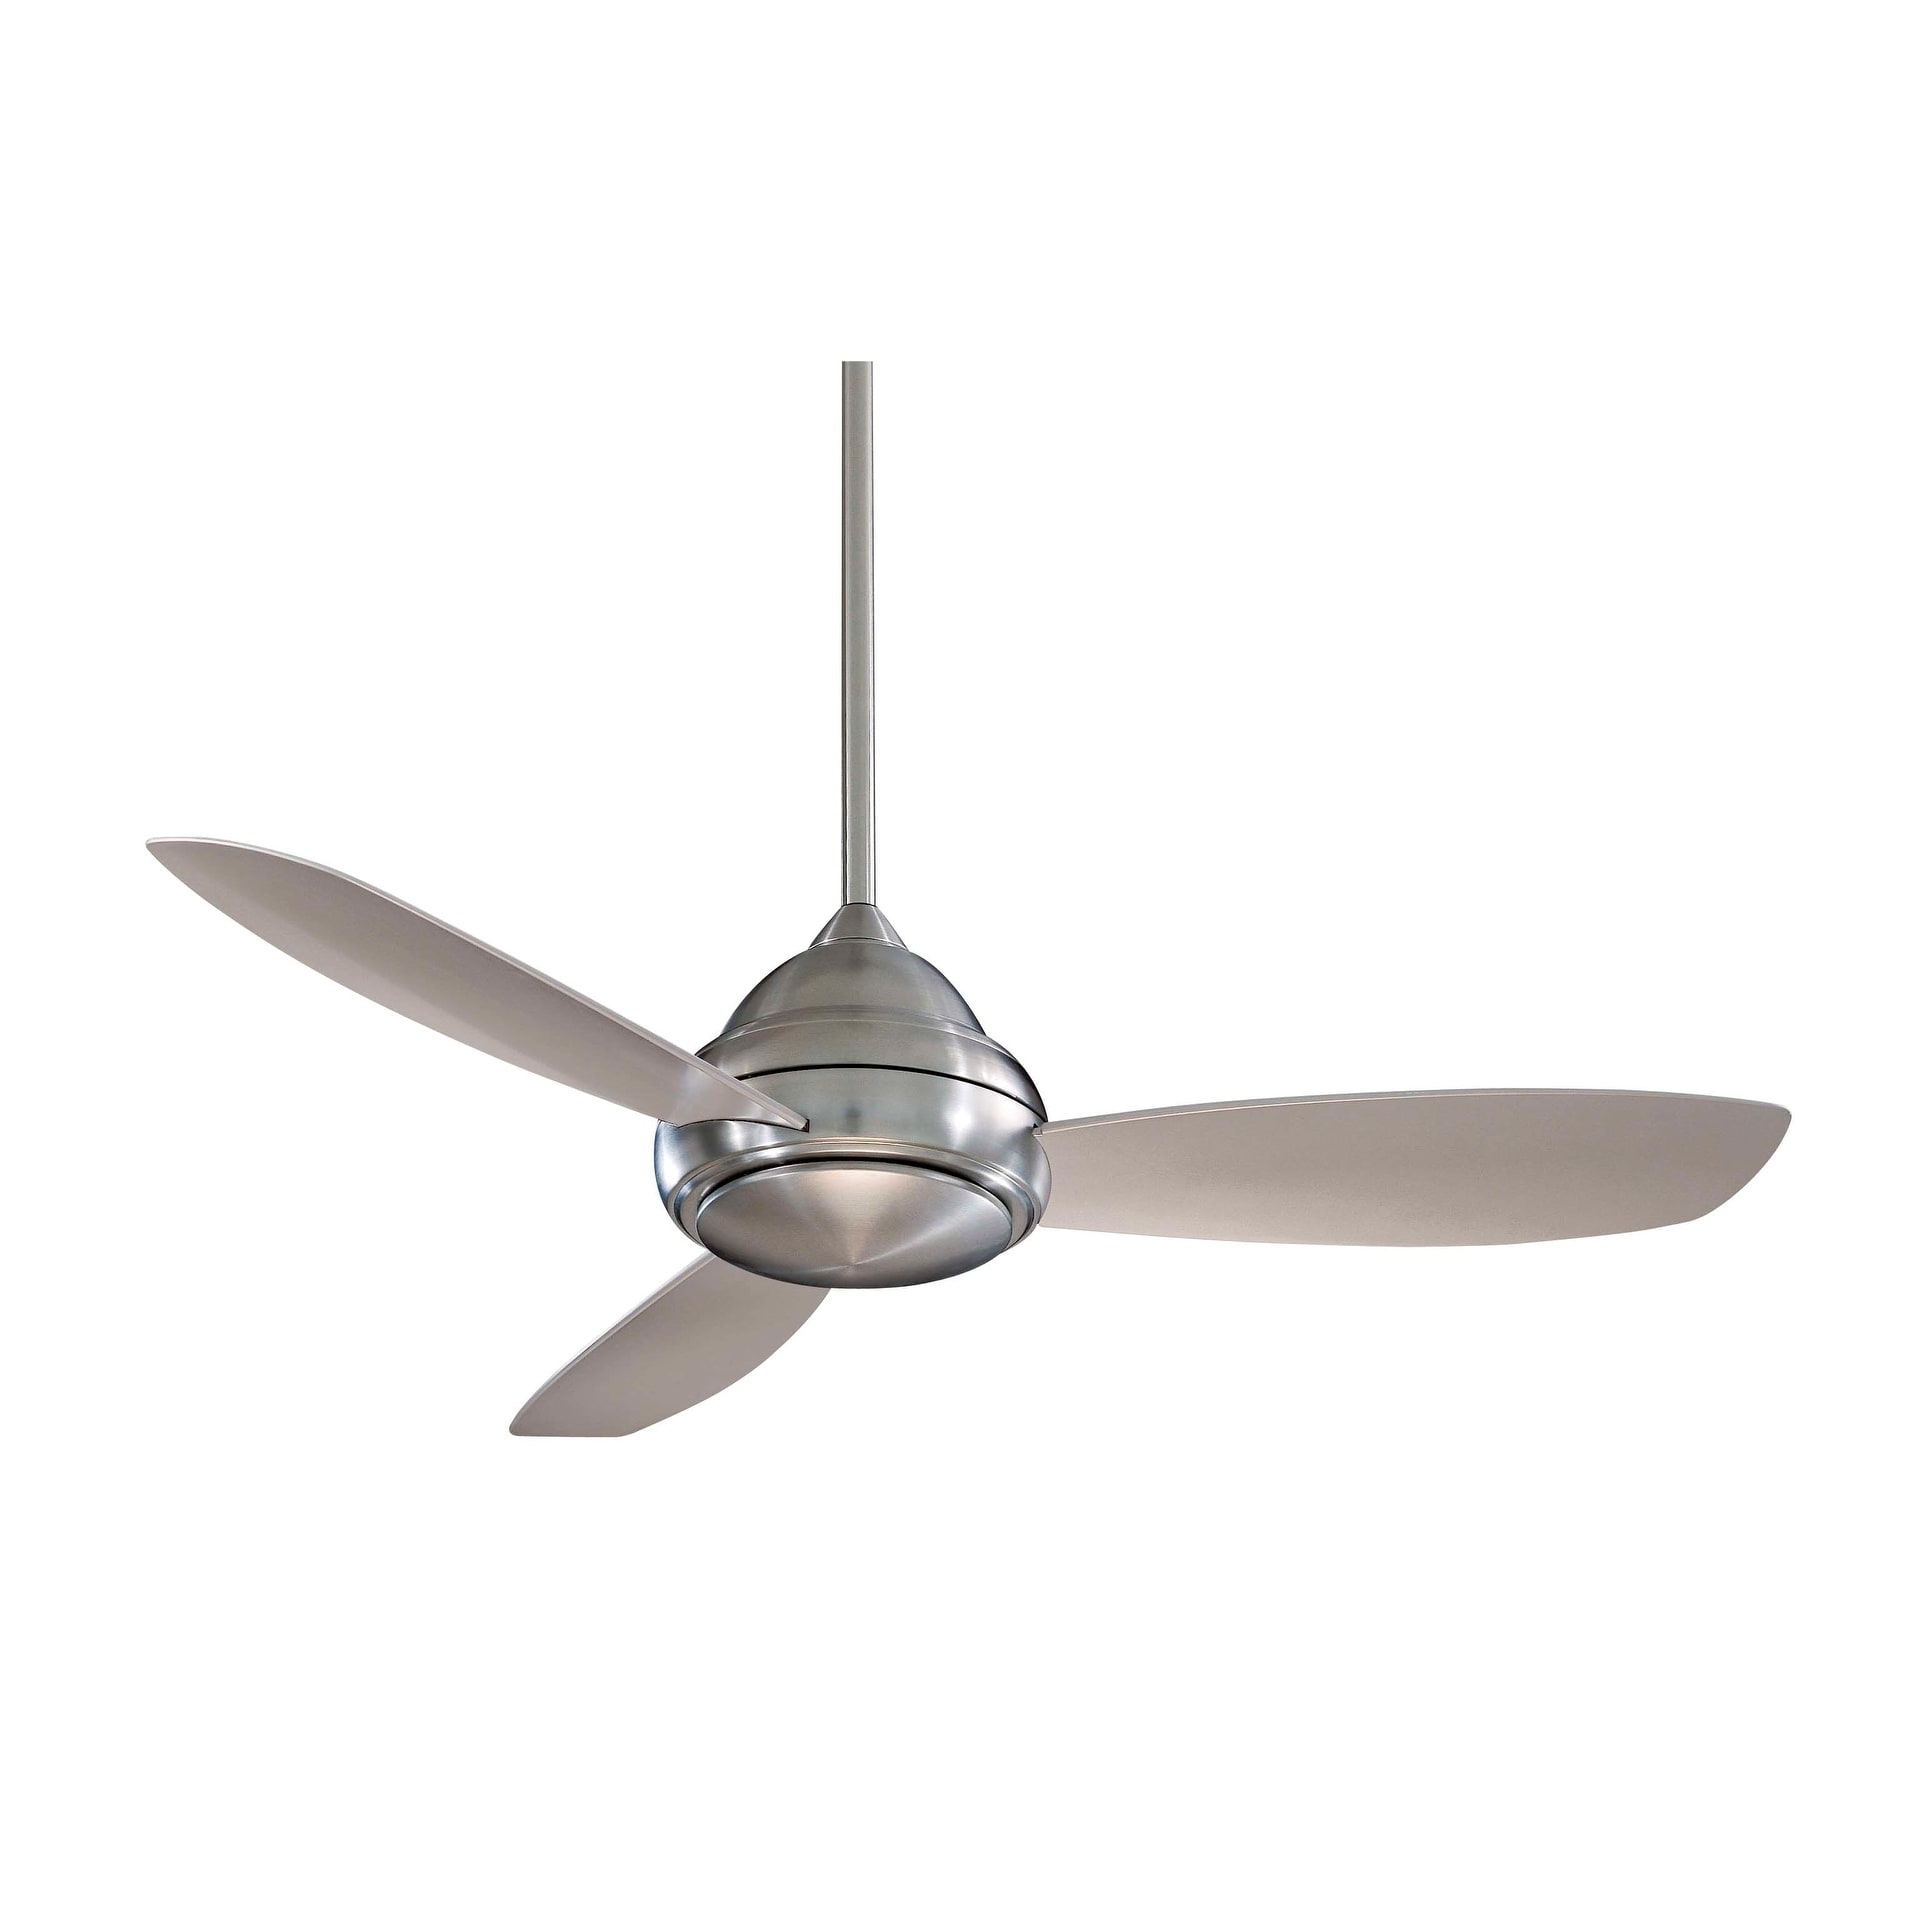 Shop Concept I 52 Led Ceiling Fan In Brushed Nickel Finish W